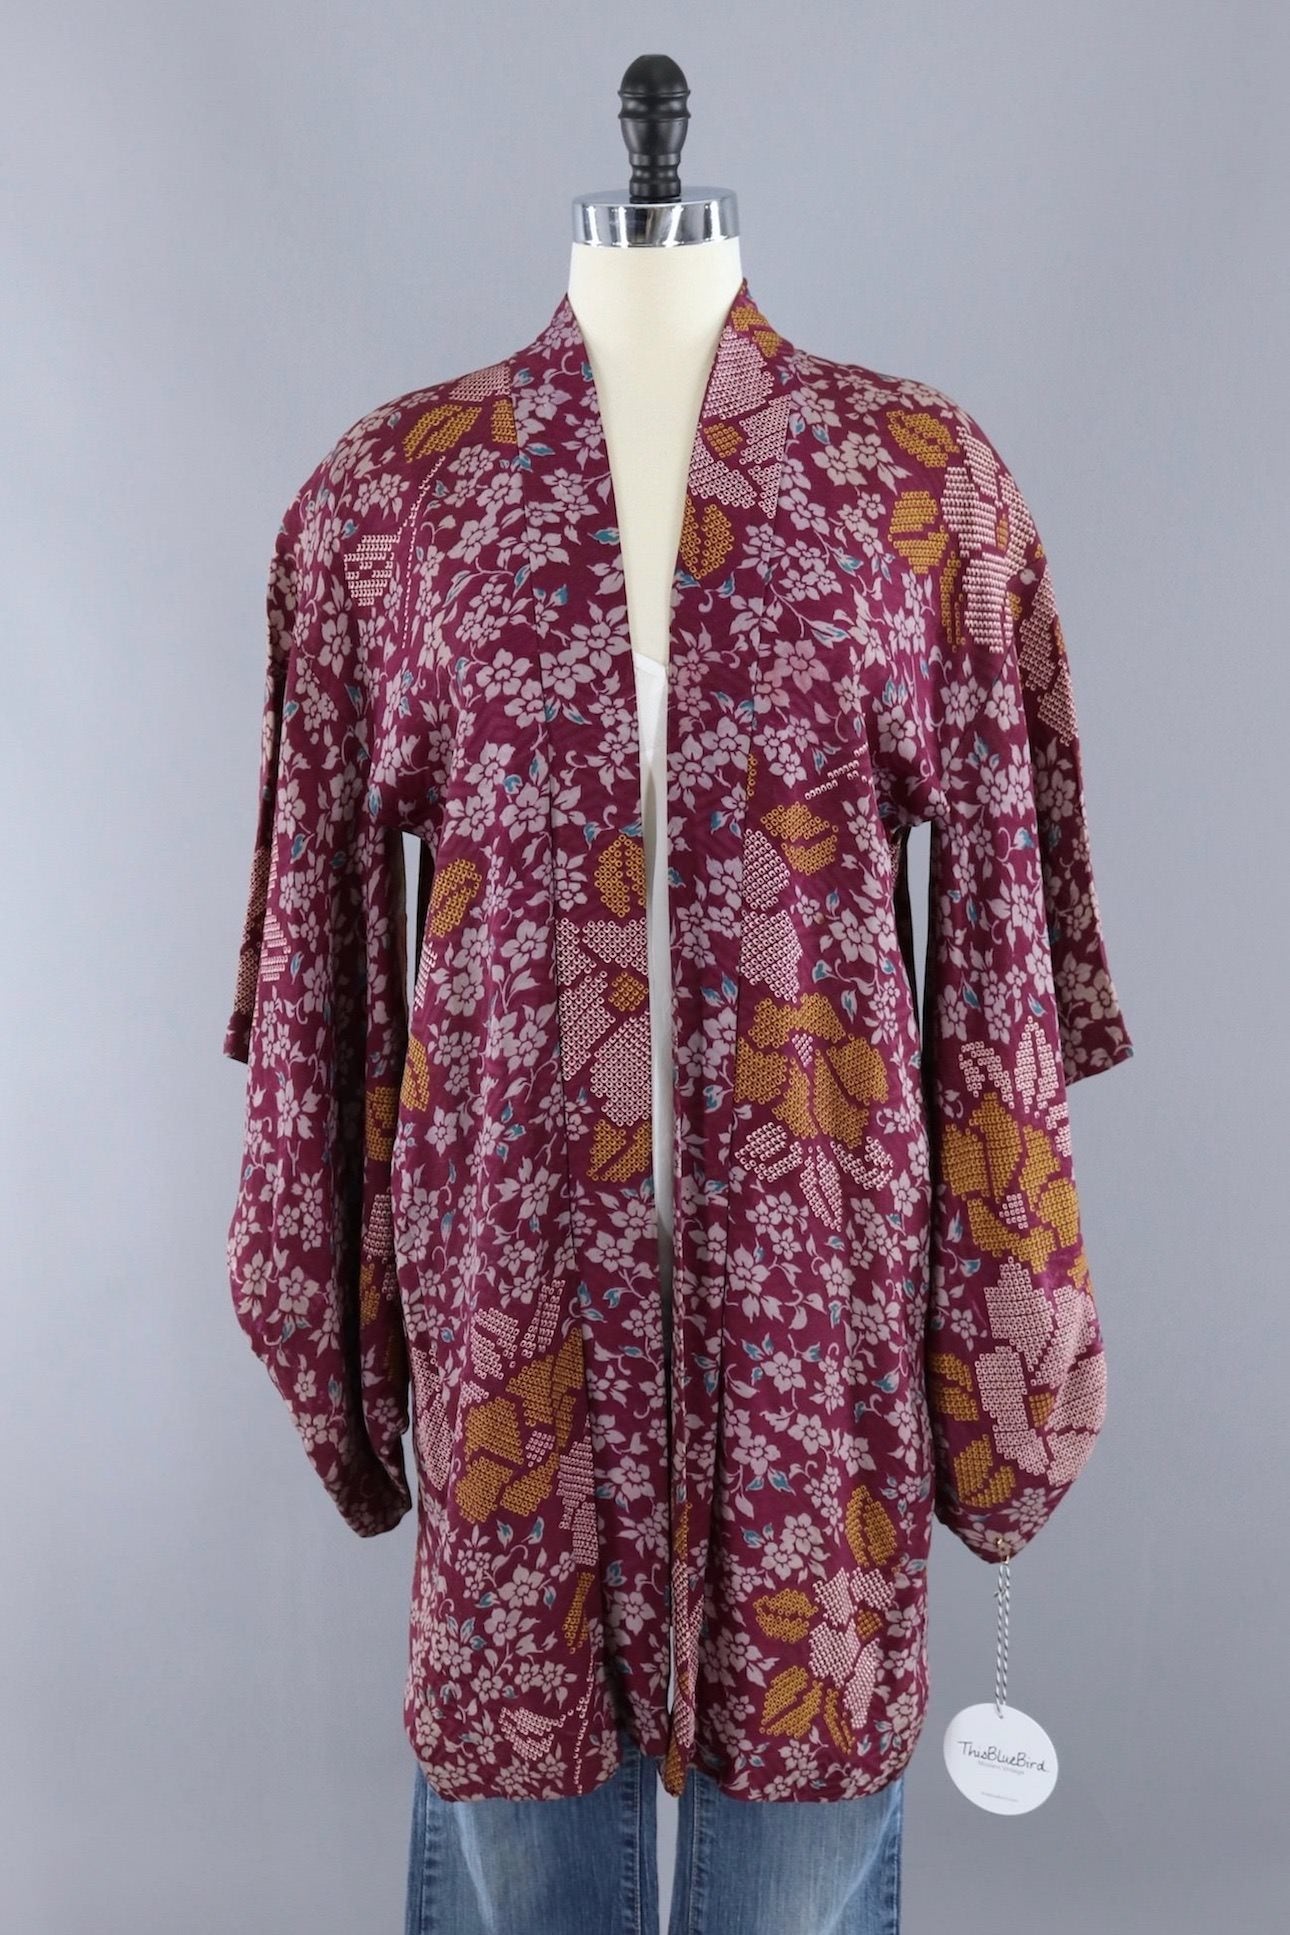 Vintage Silk Kimono Cardigan Jacket / Cranberry Red and Gold Floral - ThisBlueBird